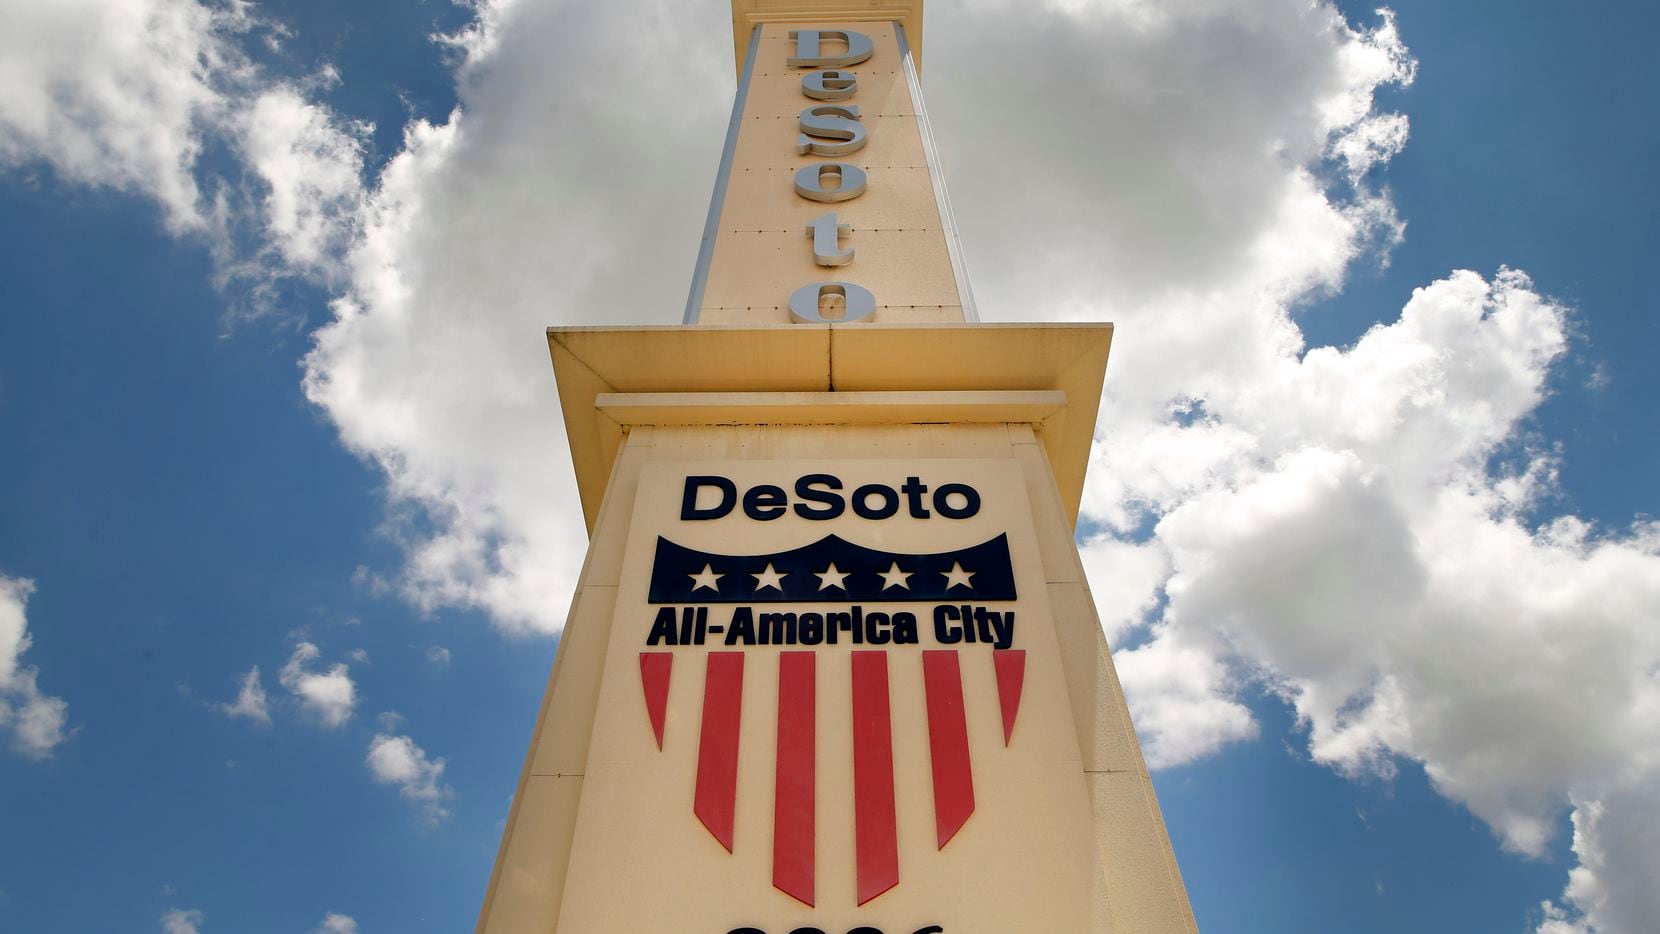 A large obelisk greets people to the City of Desoto, Texas at the intersection of E. Pleasant Run Rd. and Interstate 35E, Wednesday, June 24, 2020.